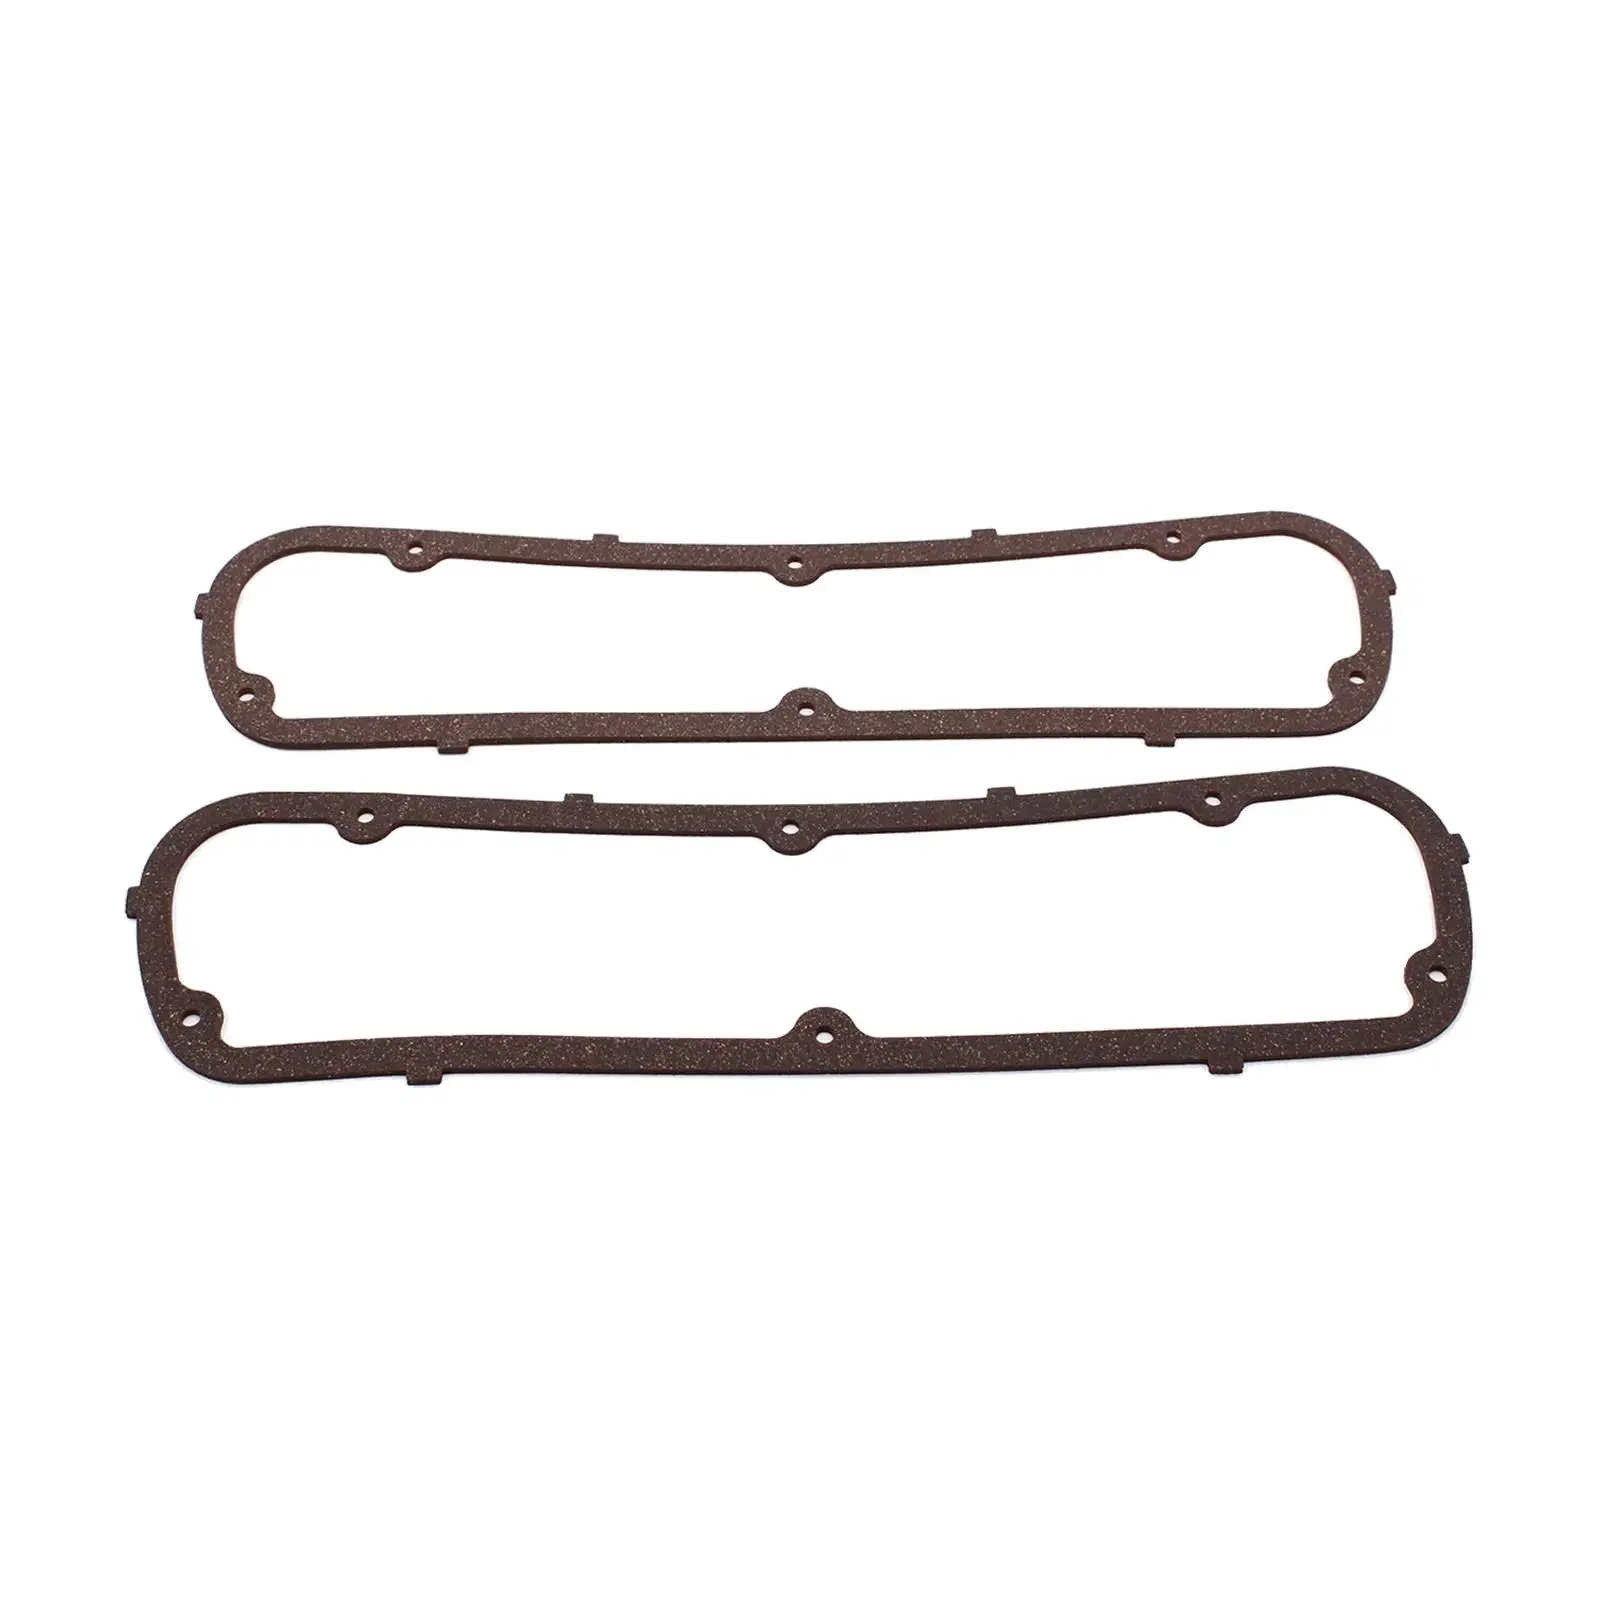 

2Pcs Cork Valve Cover Gasket 1/8" Fits for Ford SB Engines 260 351W Replace